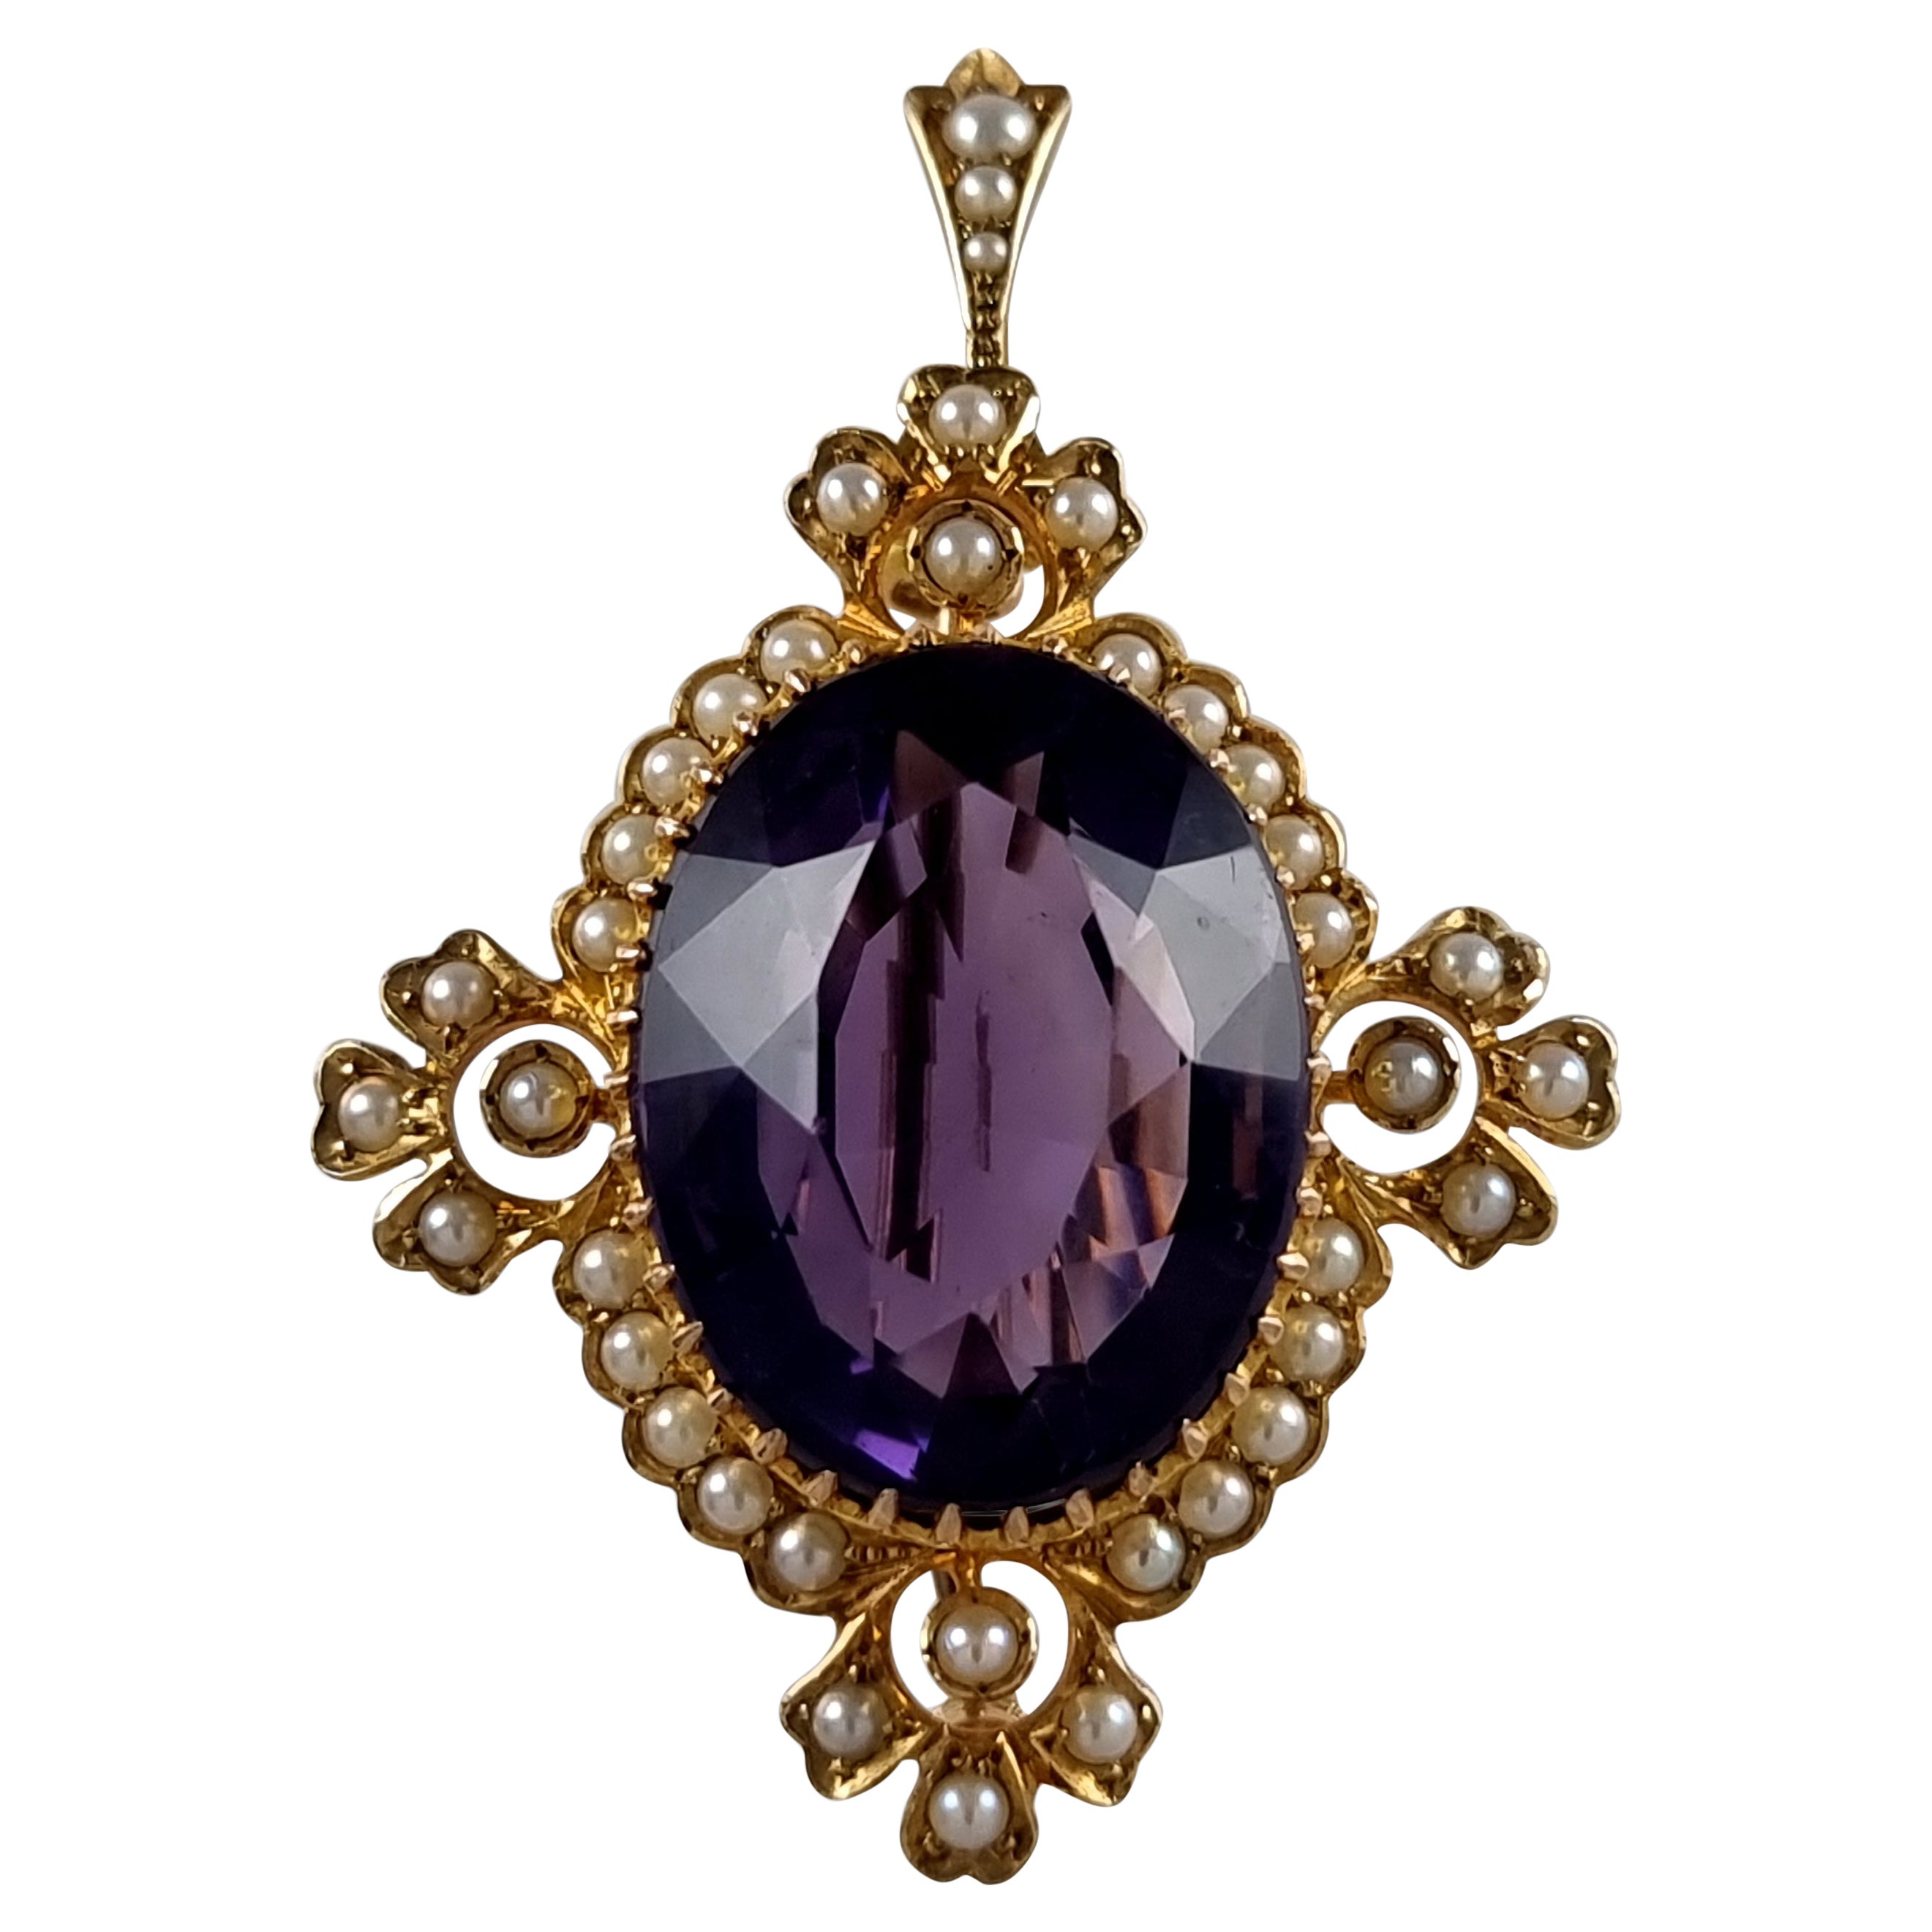 Edwardian 15ct Gold Amethyst and Seed Pearl Pendant Brooch